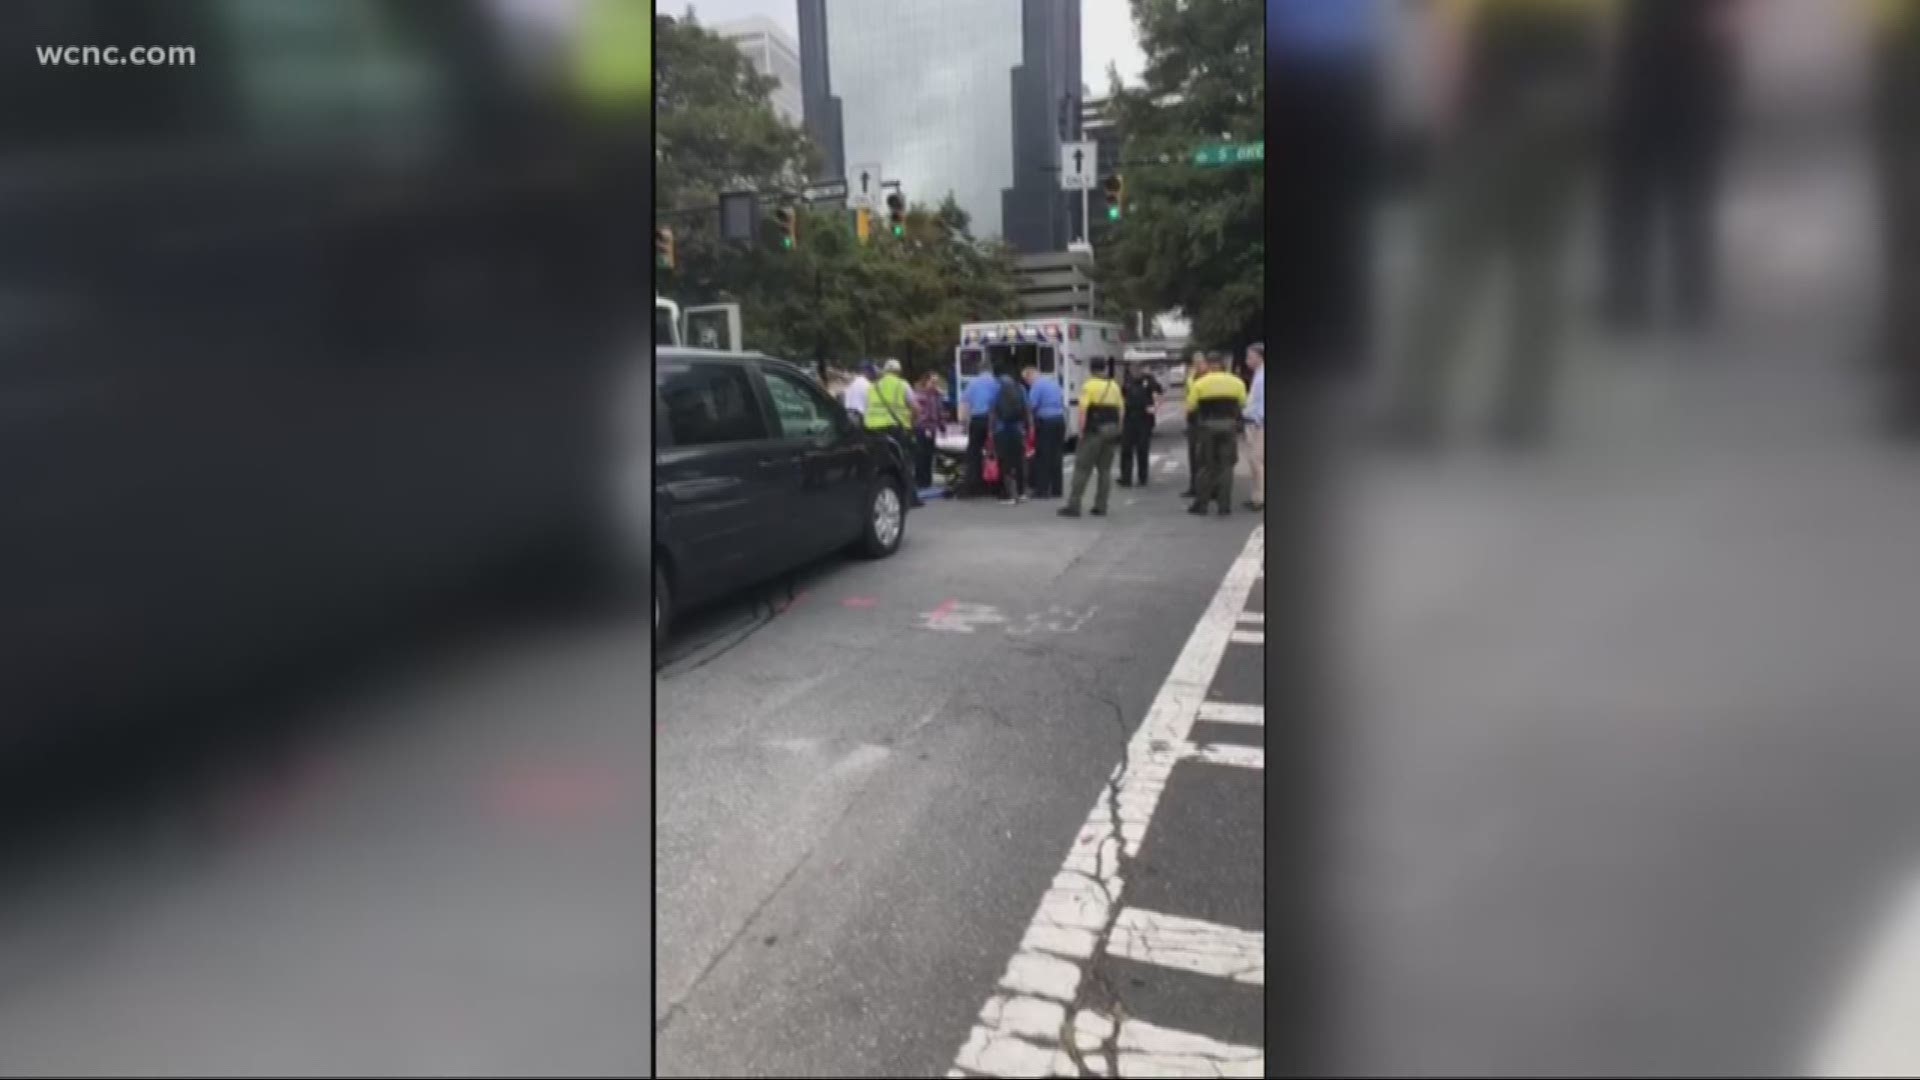 Tariq Bokhari went on Facebook Live and said he was just yards away when a car and an electric scooter collided in uptown Tuesday afternoon.